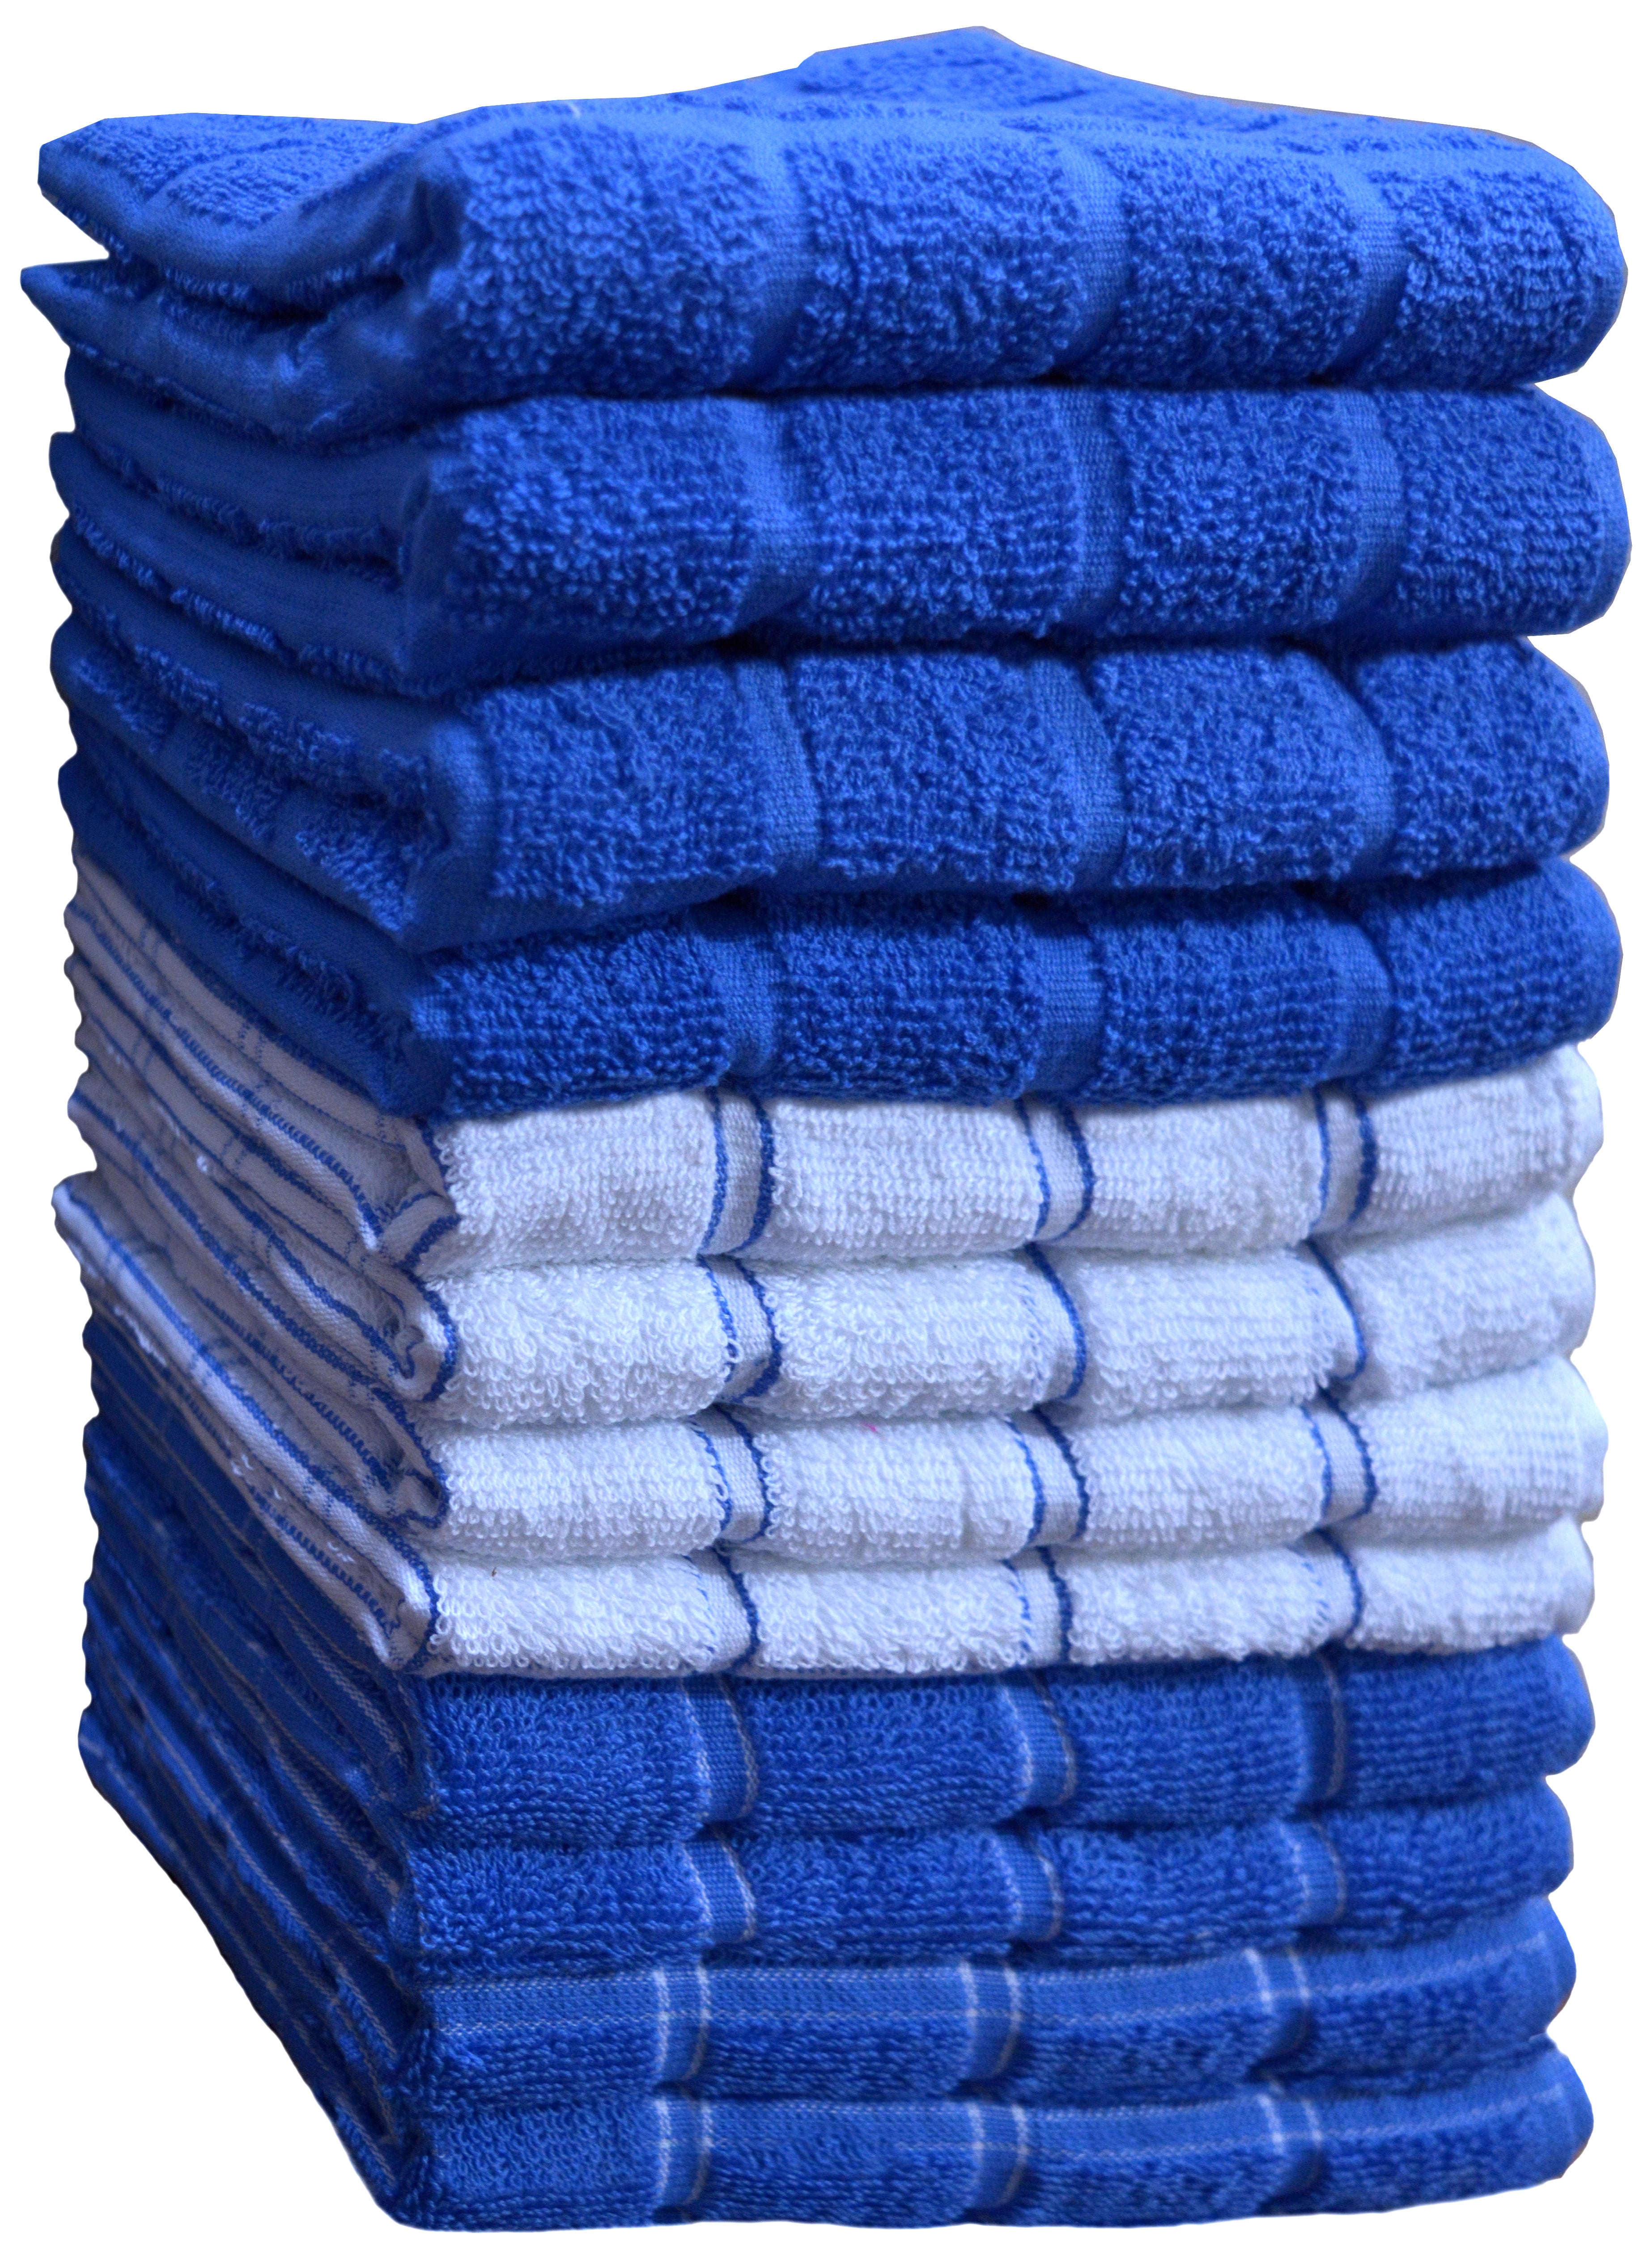 Home Labels Classic Kitchen Towel 12 Pack, 15 x 25 Inches, 100% Ring Spun Cotton Super Soft and Absorbent Linen Dish Towels, Tea Bar Set (Blue)